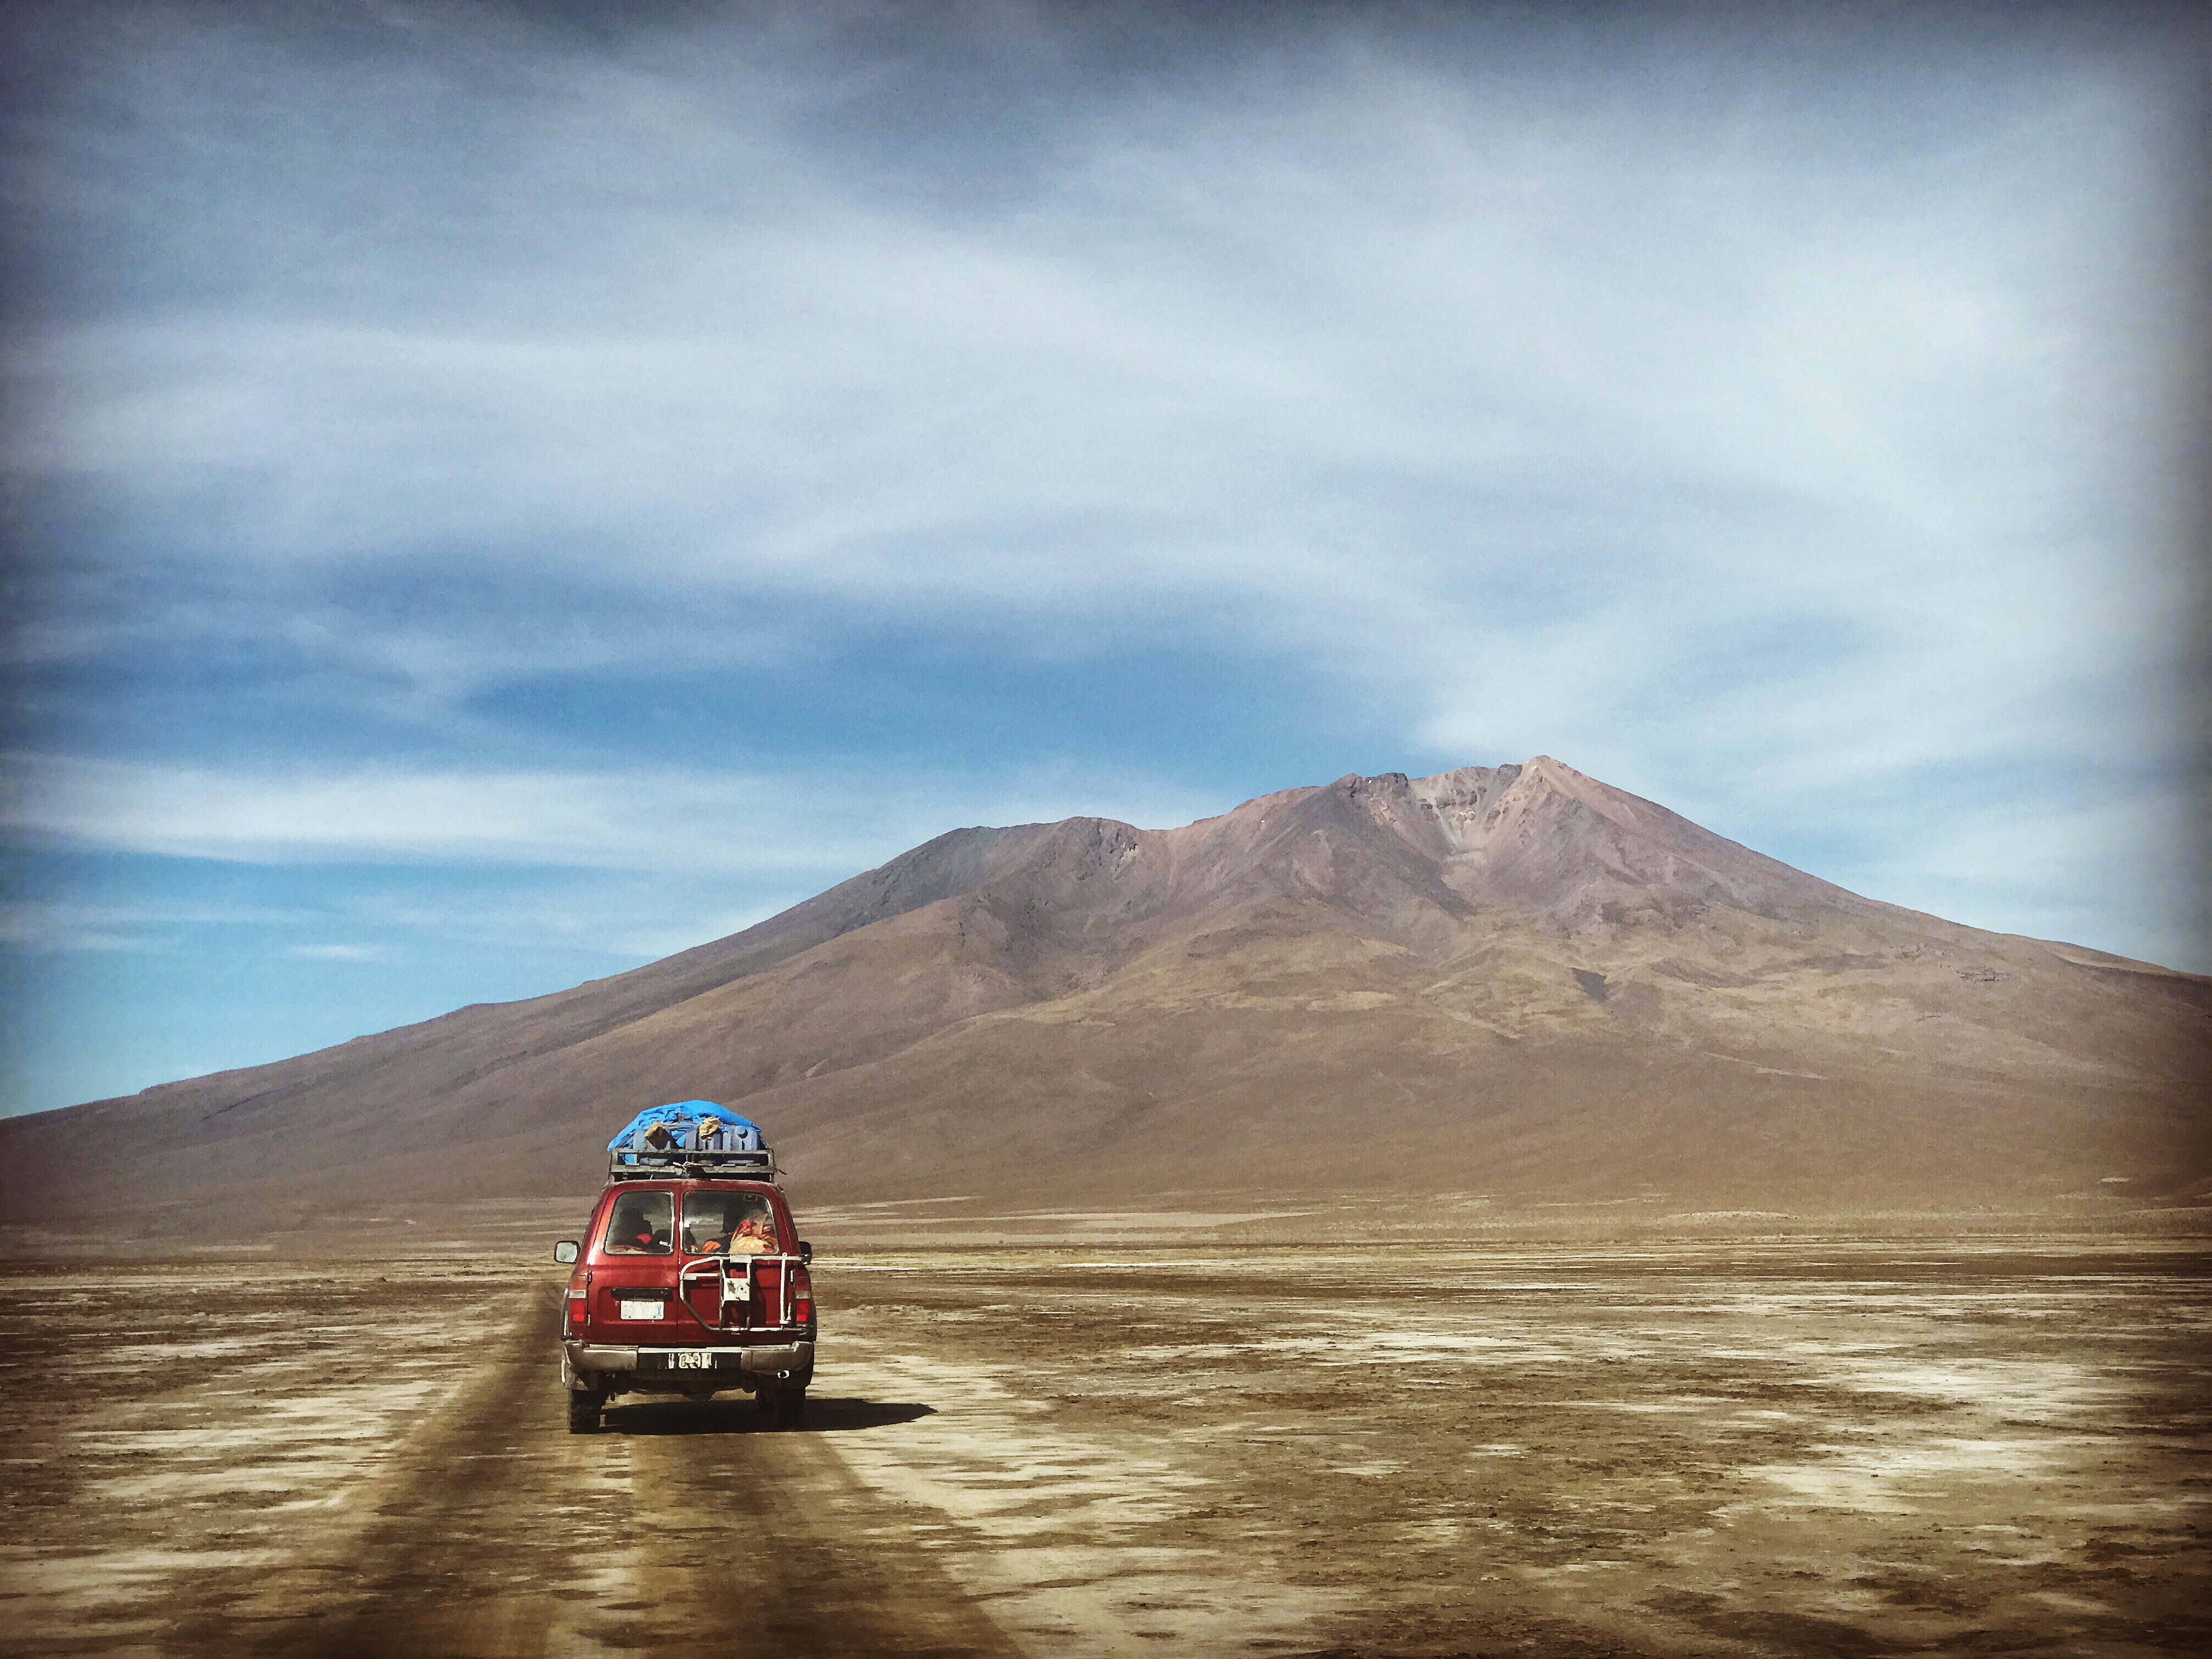 The 5 essentials tips you need to know before your trip to salar de uyuni